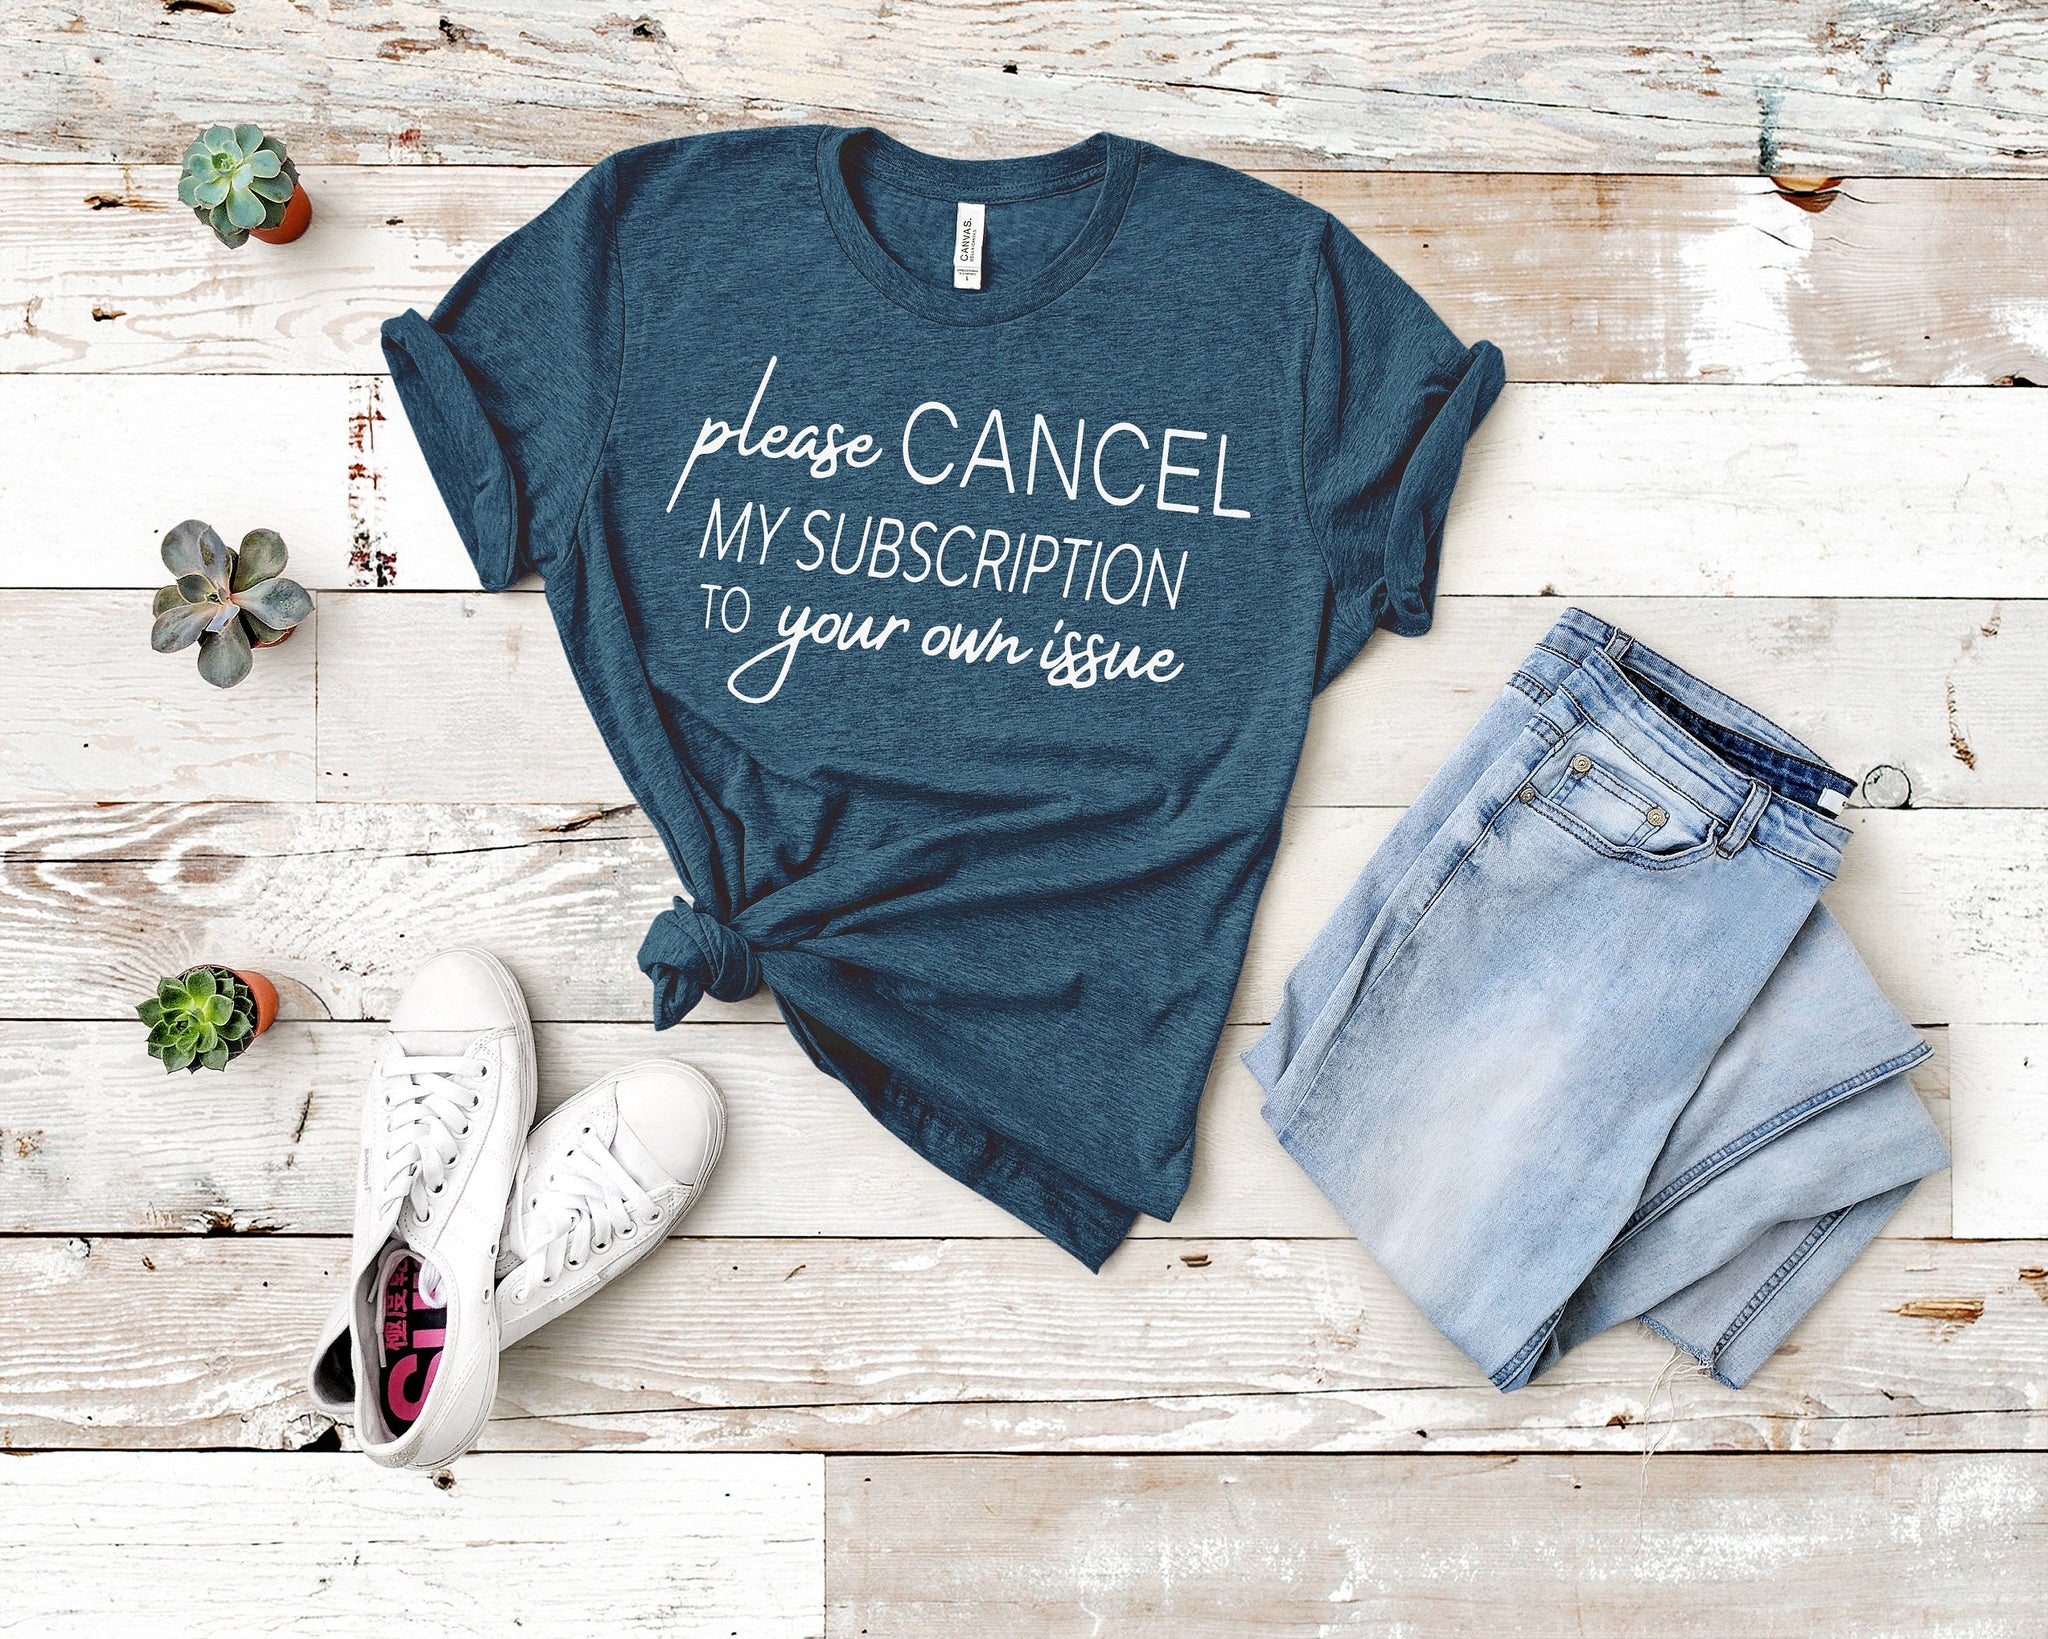 Funny Shirt, Sarcastic Shirt, Funny Slogan Shirts, Cancel My Subscription to Your Issues, Funny Tshirt Sayings, Funny Tshirts For Women,l69 - Fastdeliverytees.com